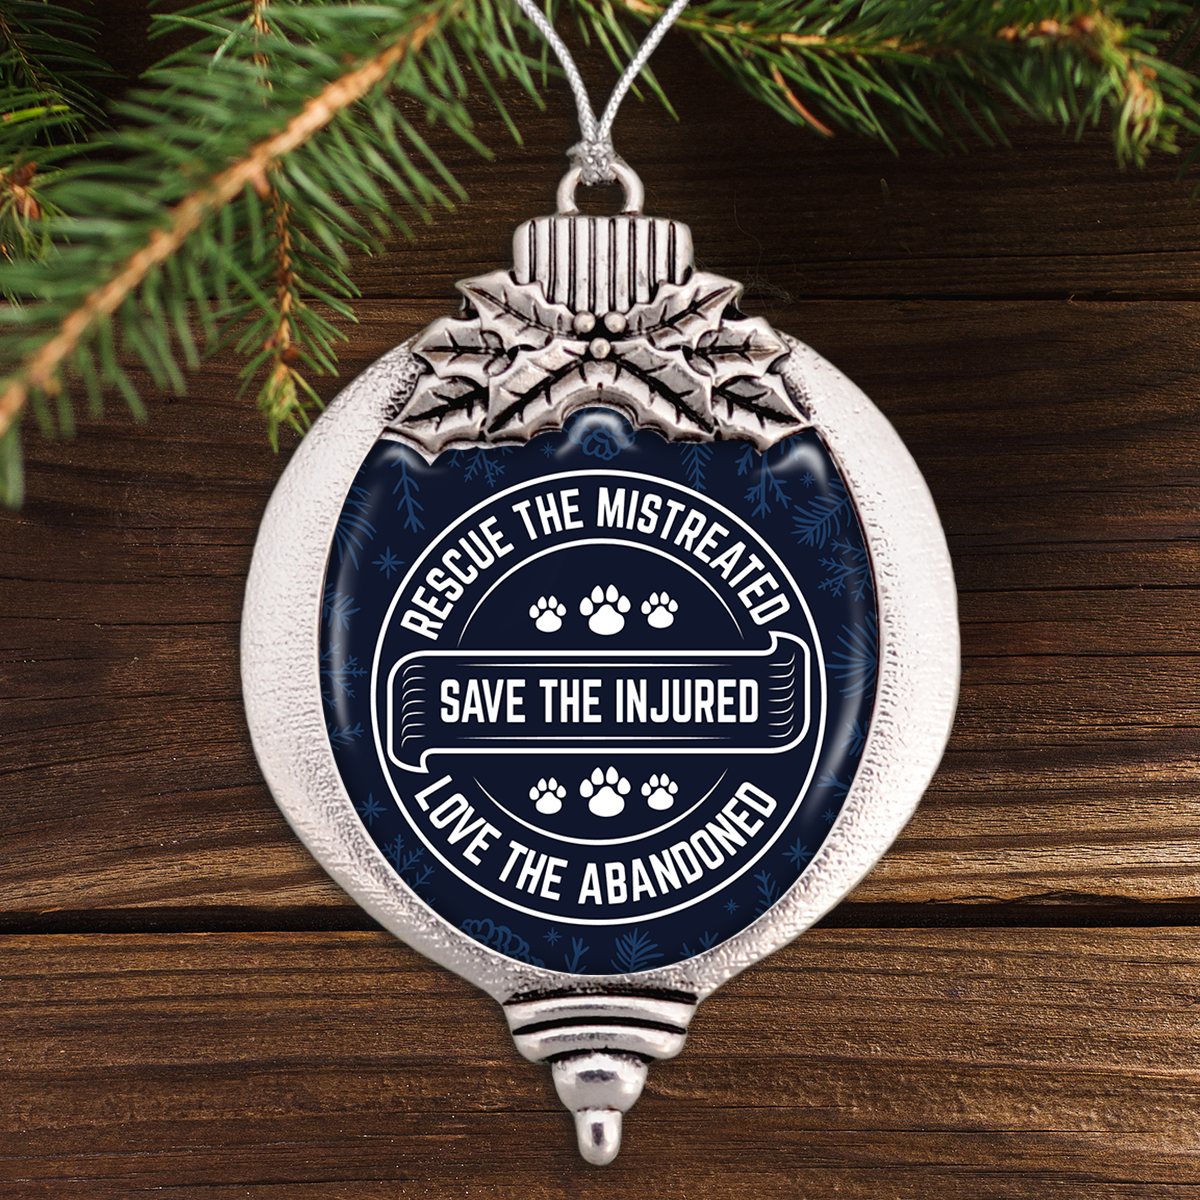 Rescue The Mistreated, Save The Injured, Love The Abandoned Bulb Ornament